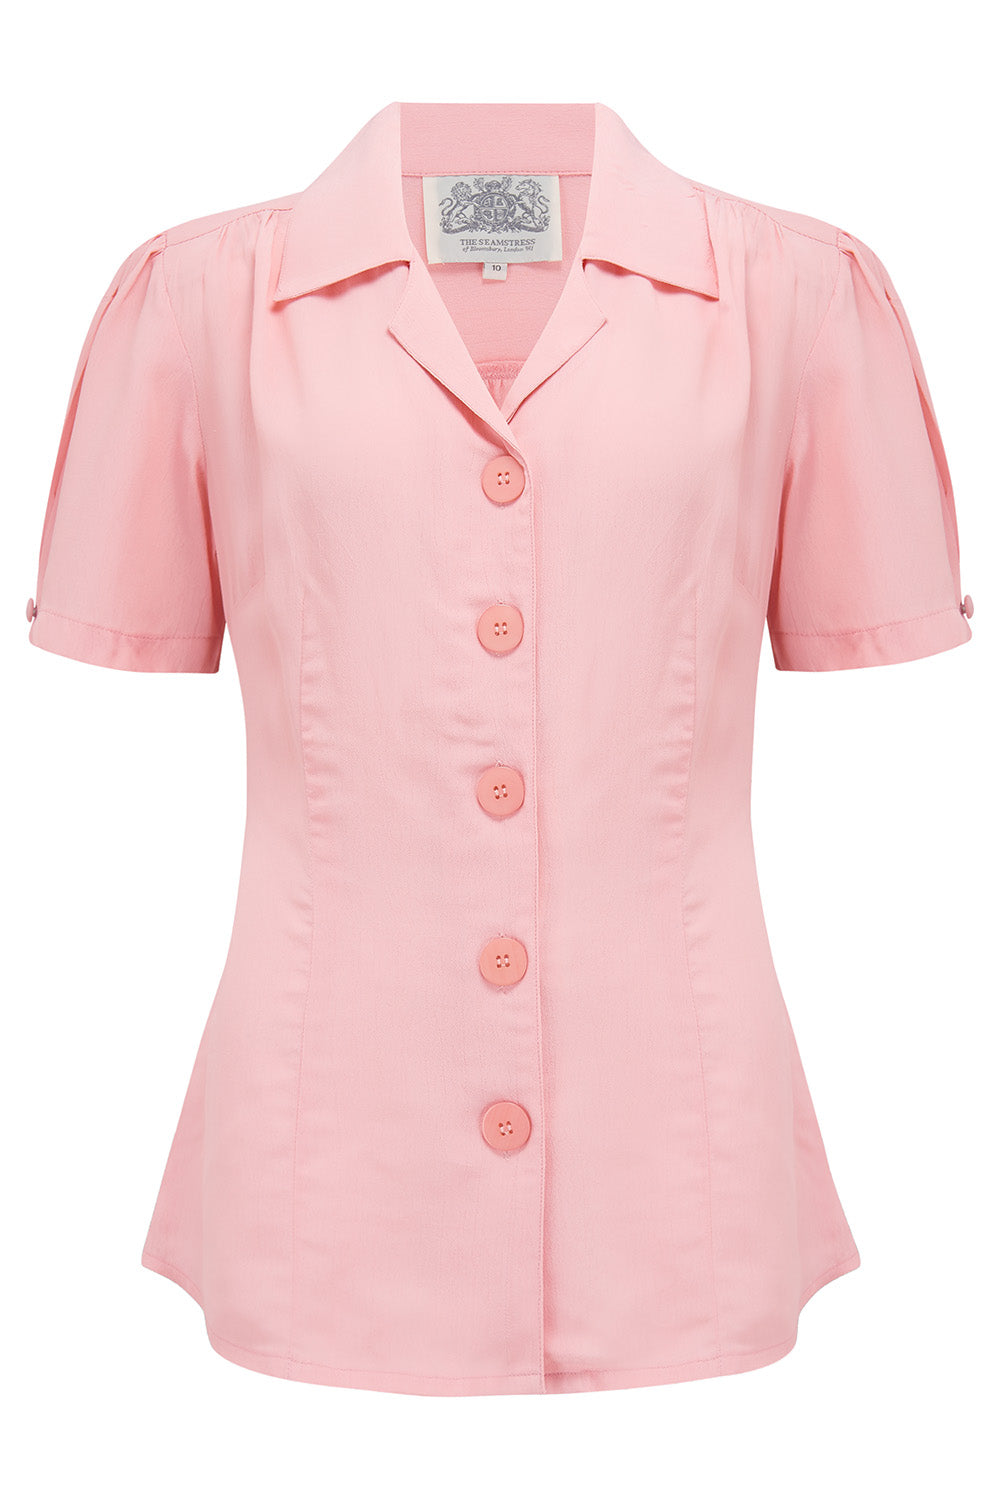 "Grace" Blouse in Blossom Pink, Classic 1940s Vintage Style - CC41, Goodwood Revival, Twinwood Festival, Viva Las Vegas Rockabilly Weekend Rock n Romance The Seamstress Of Bloomsbury